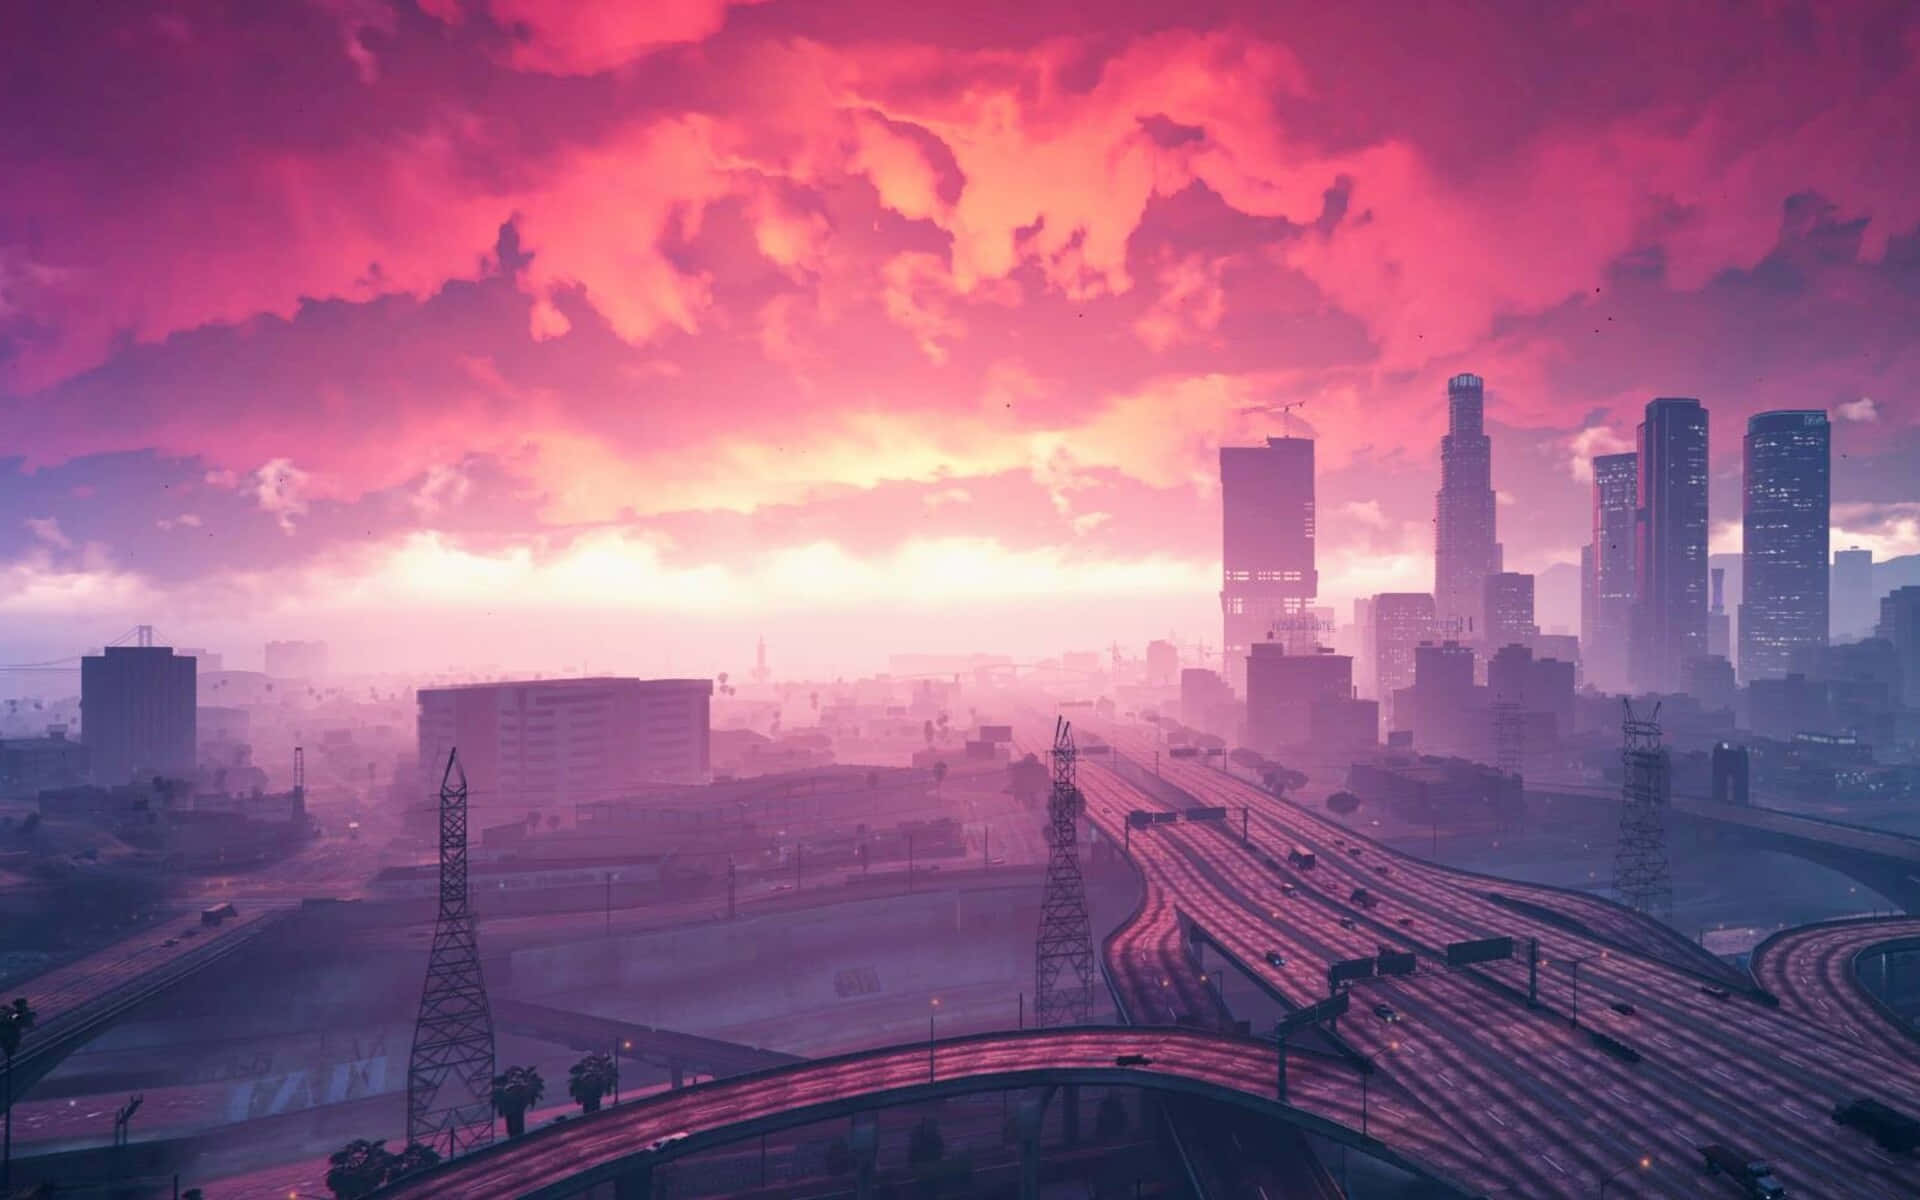 A Cityscape With A Pink Sky And Highways